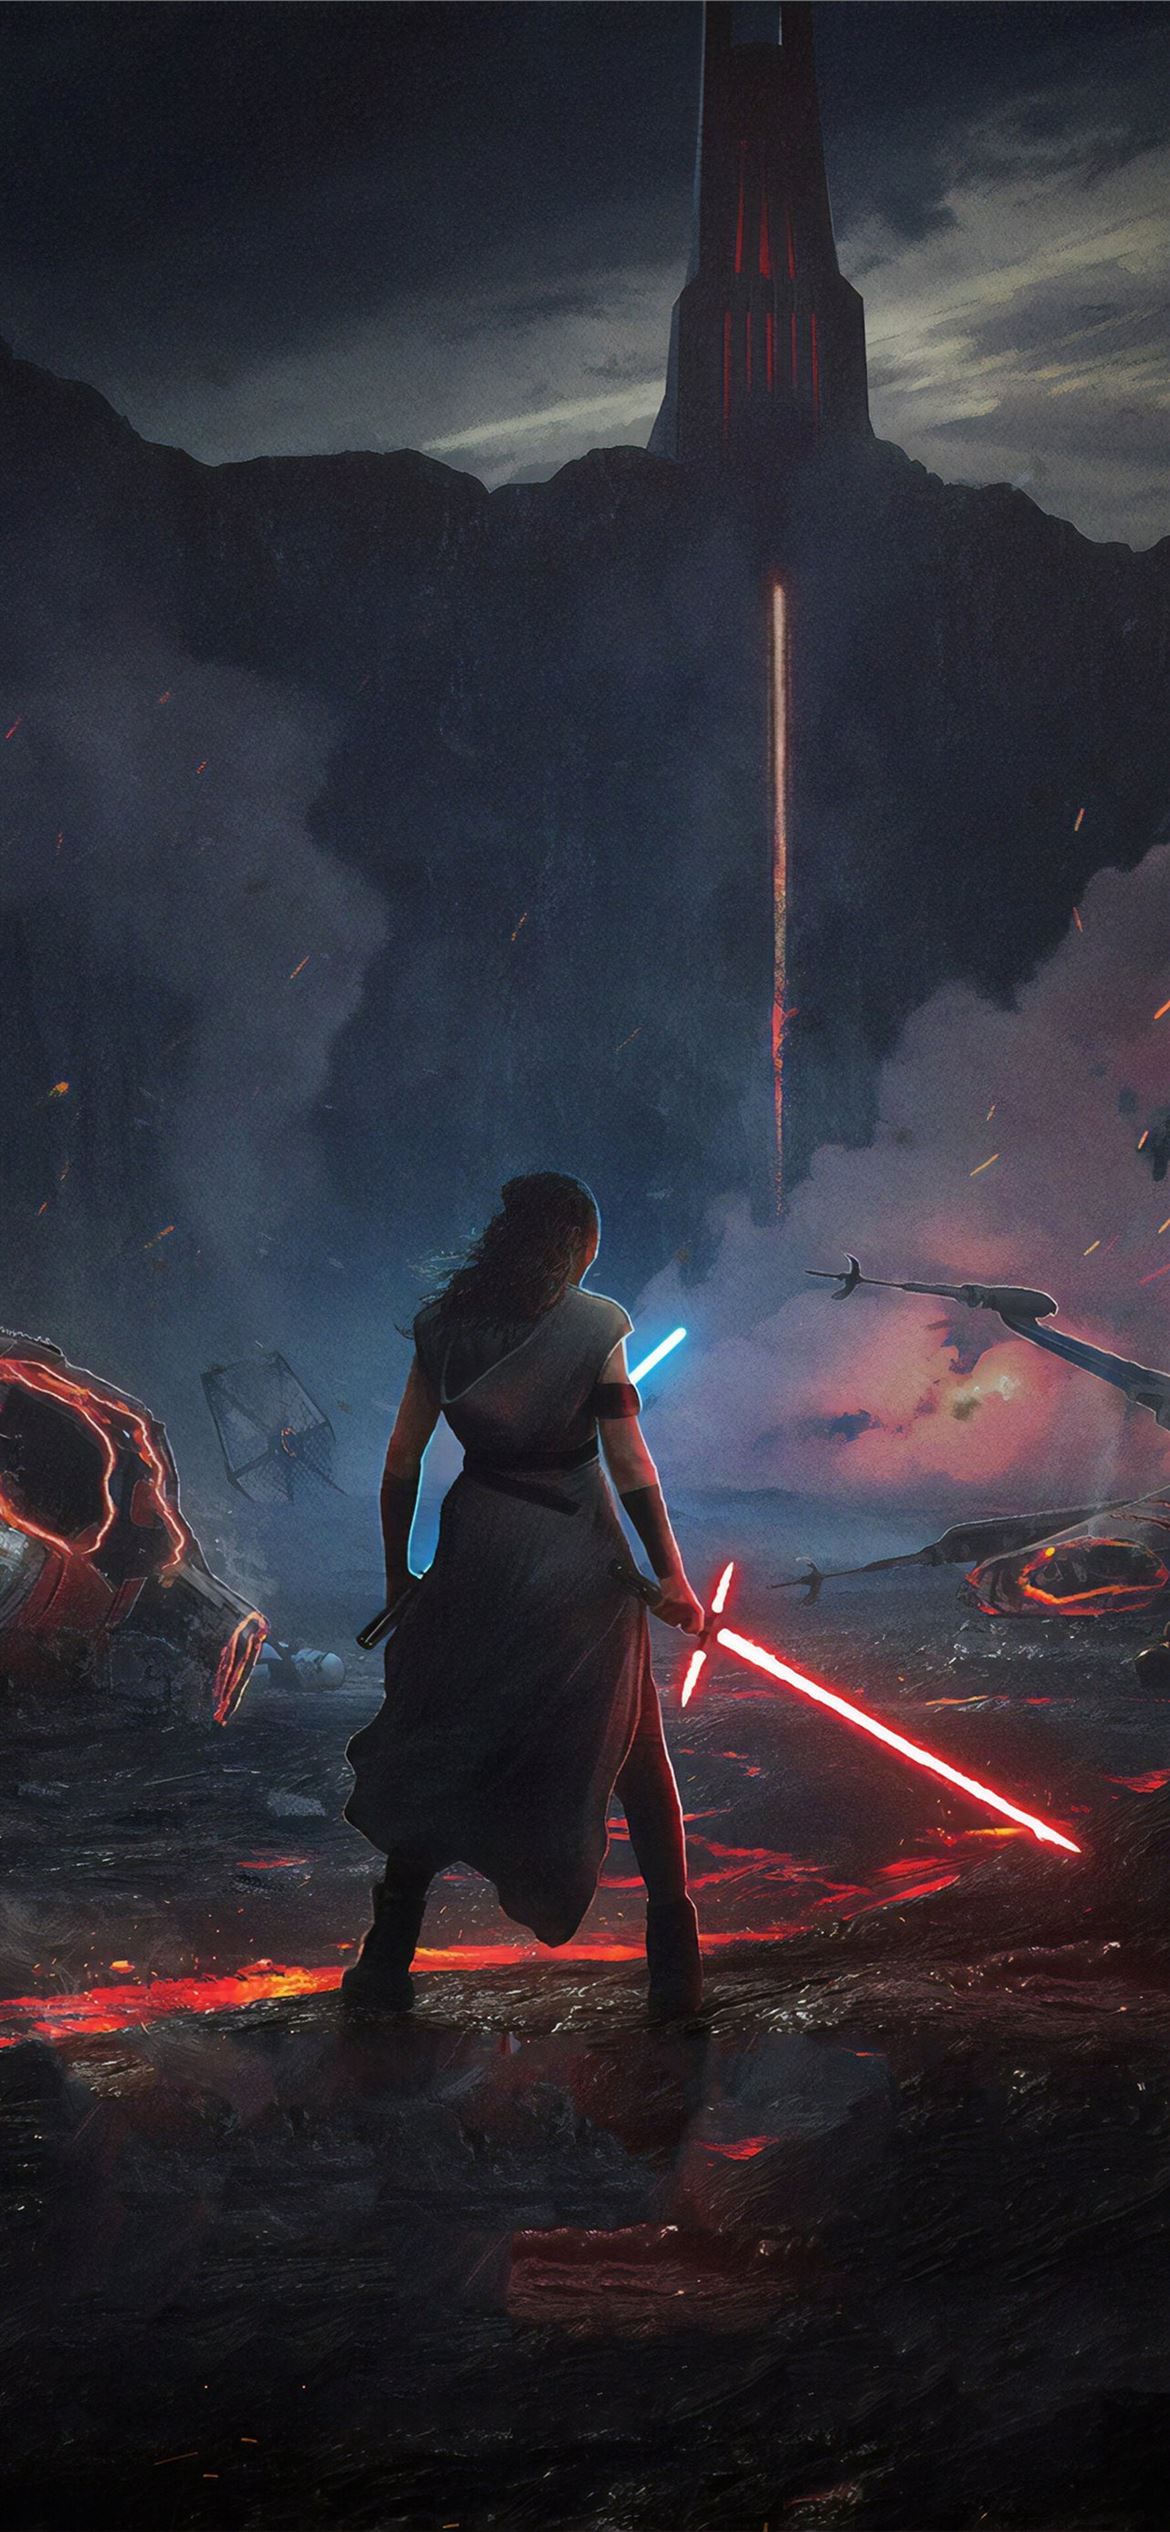 Rey with lightsaber in the Star Wars 2019 wallpaper - Star Wars